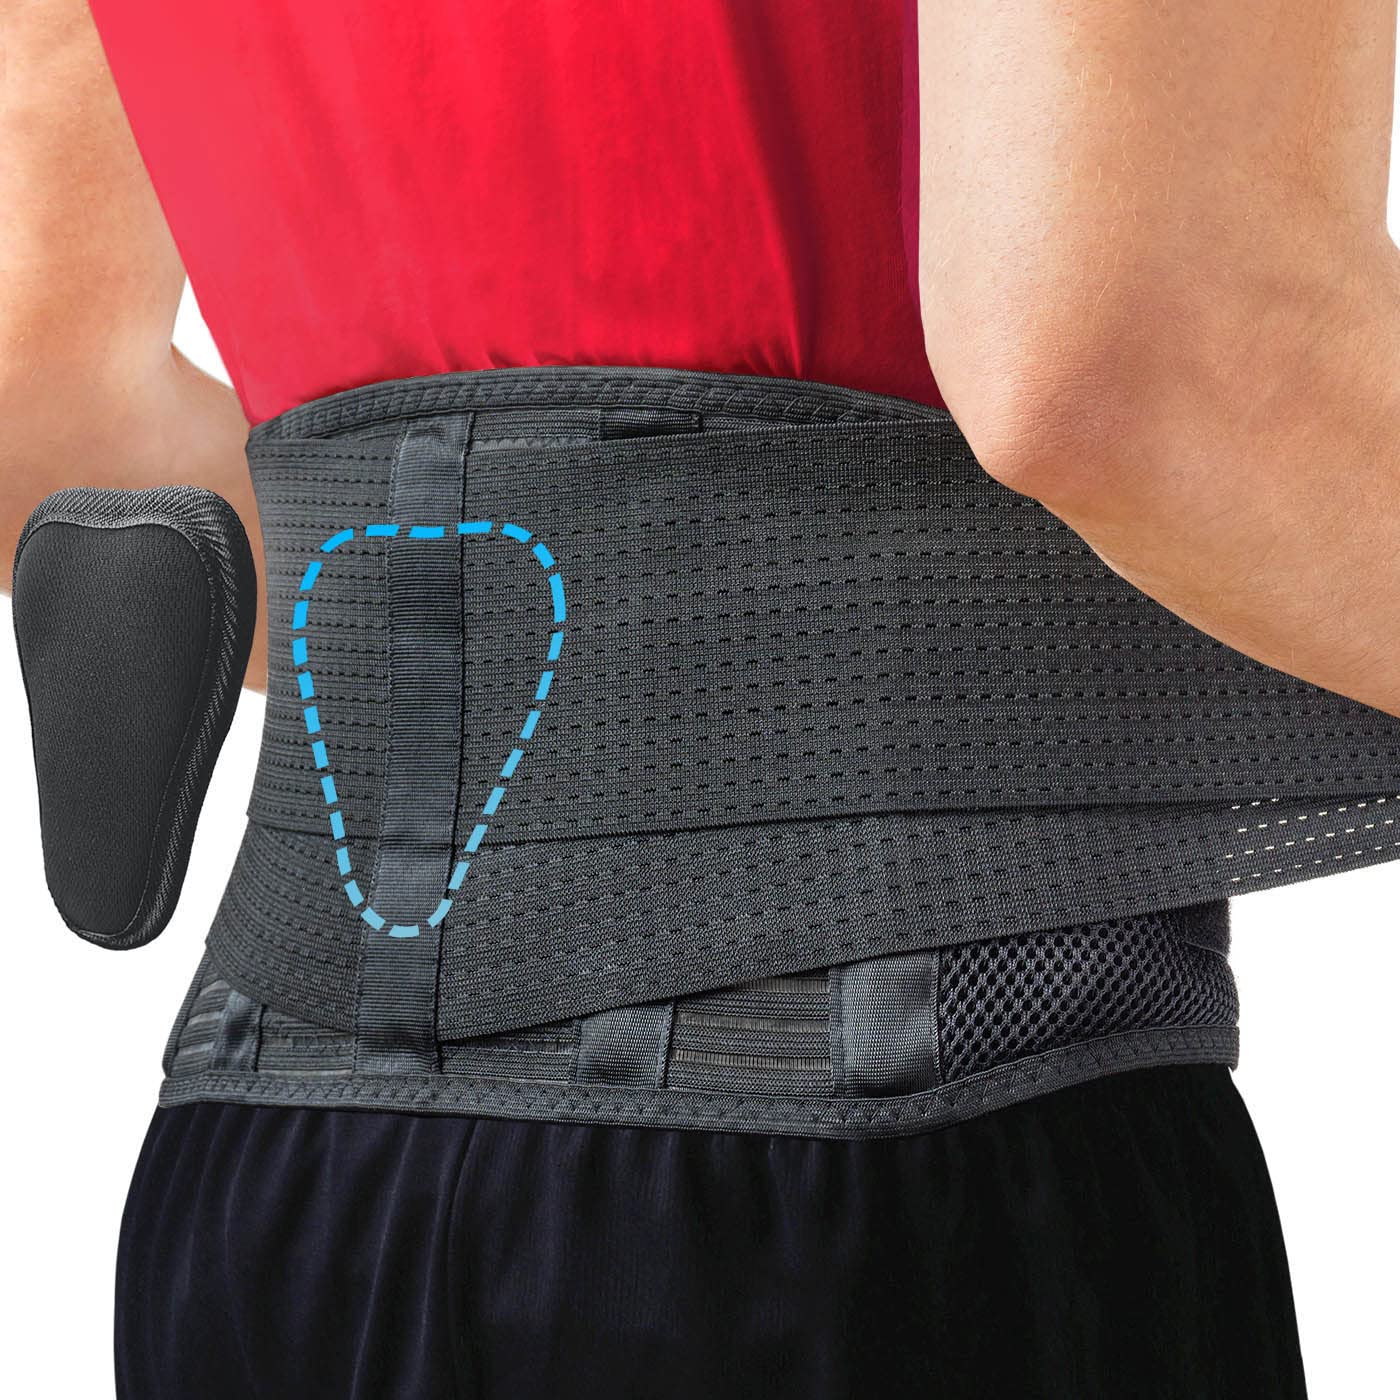 Sparthos Back Support Belt Relief for Back Pain, Herniated Disc, Sciatica, Scoliosis and more! - Breathable Mesh Design with Lumbar Pad - Adjustable Support Straps - Lower Back Brace -Size Small